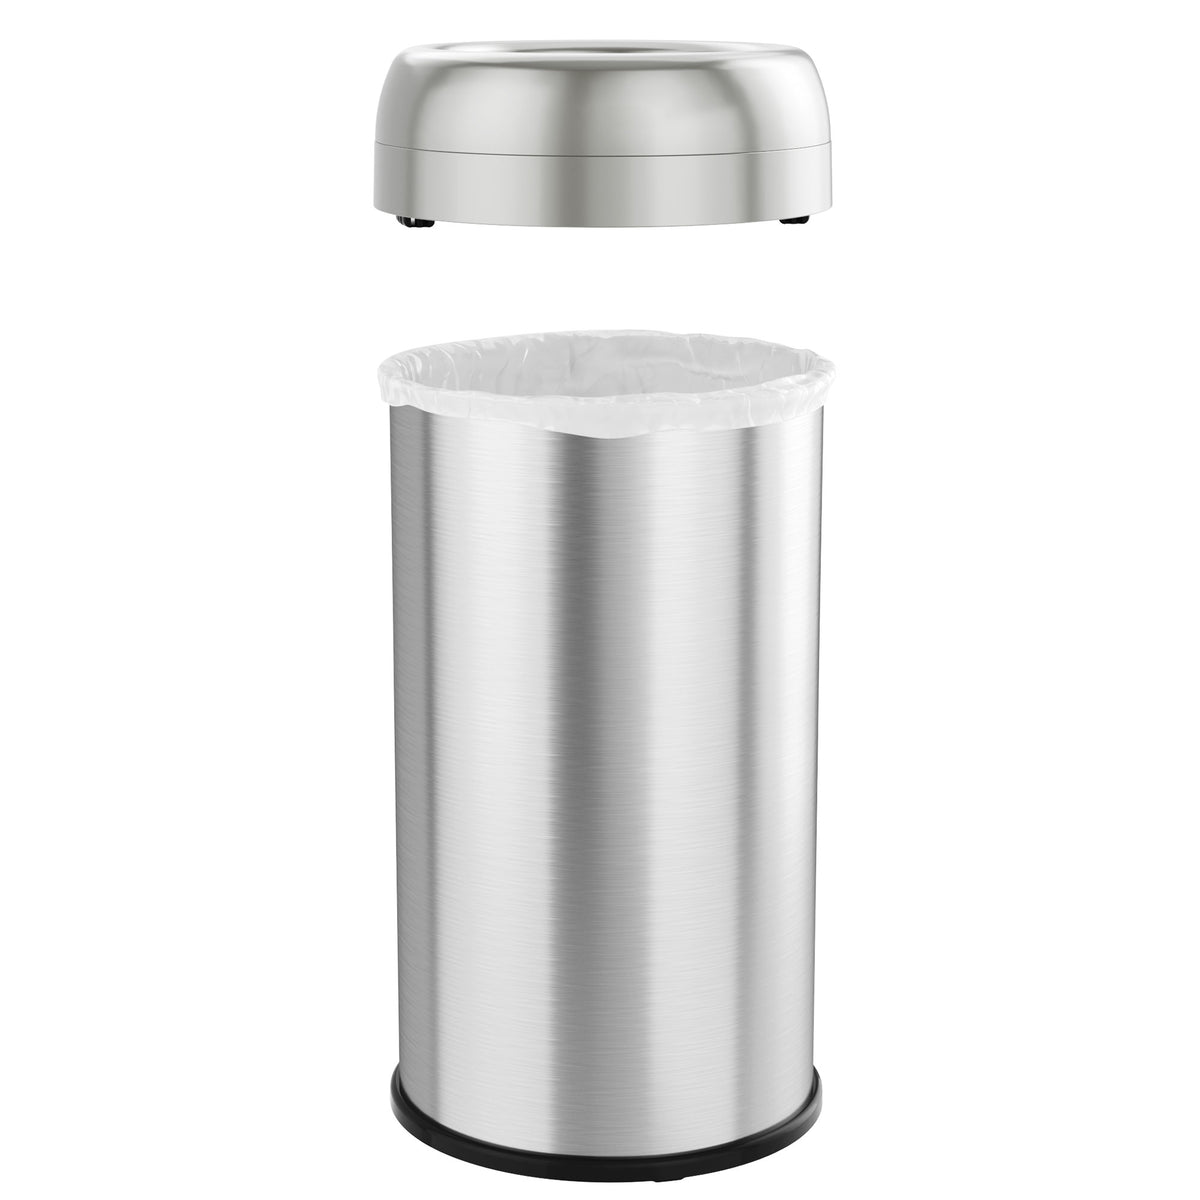 16 Gallon / 60 Liter Round Open Top Trash Can snug fit lid